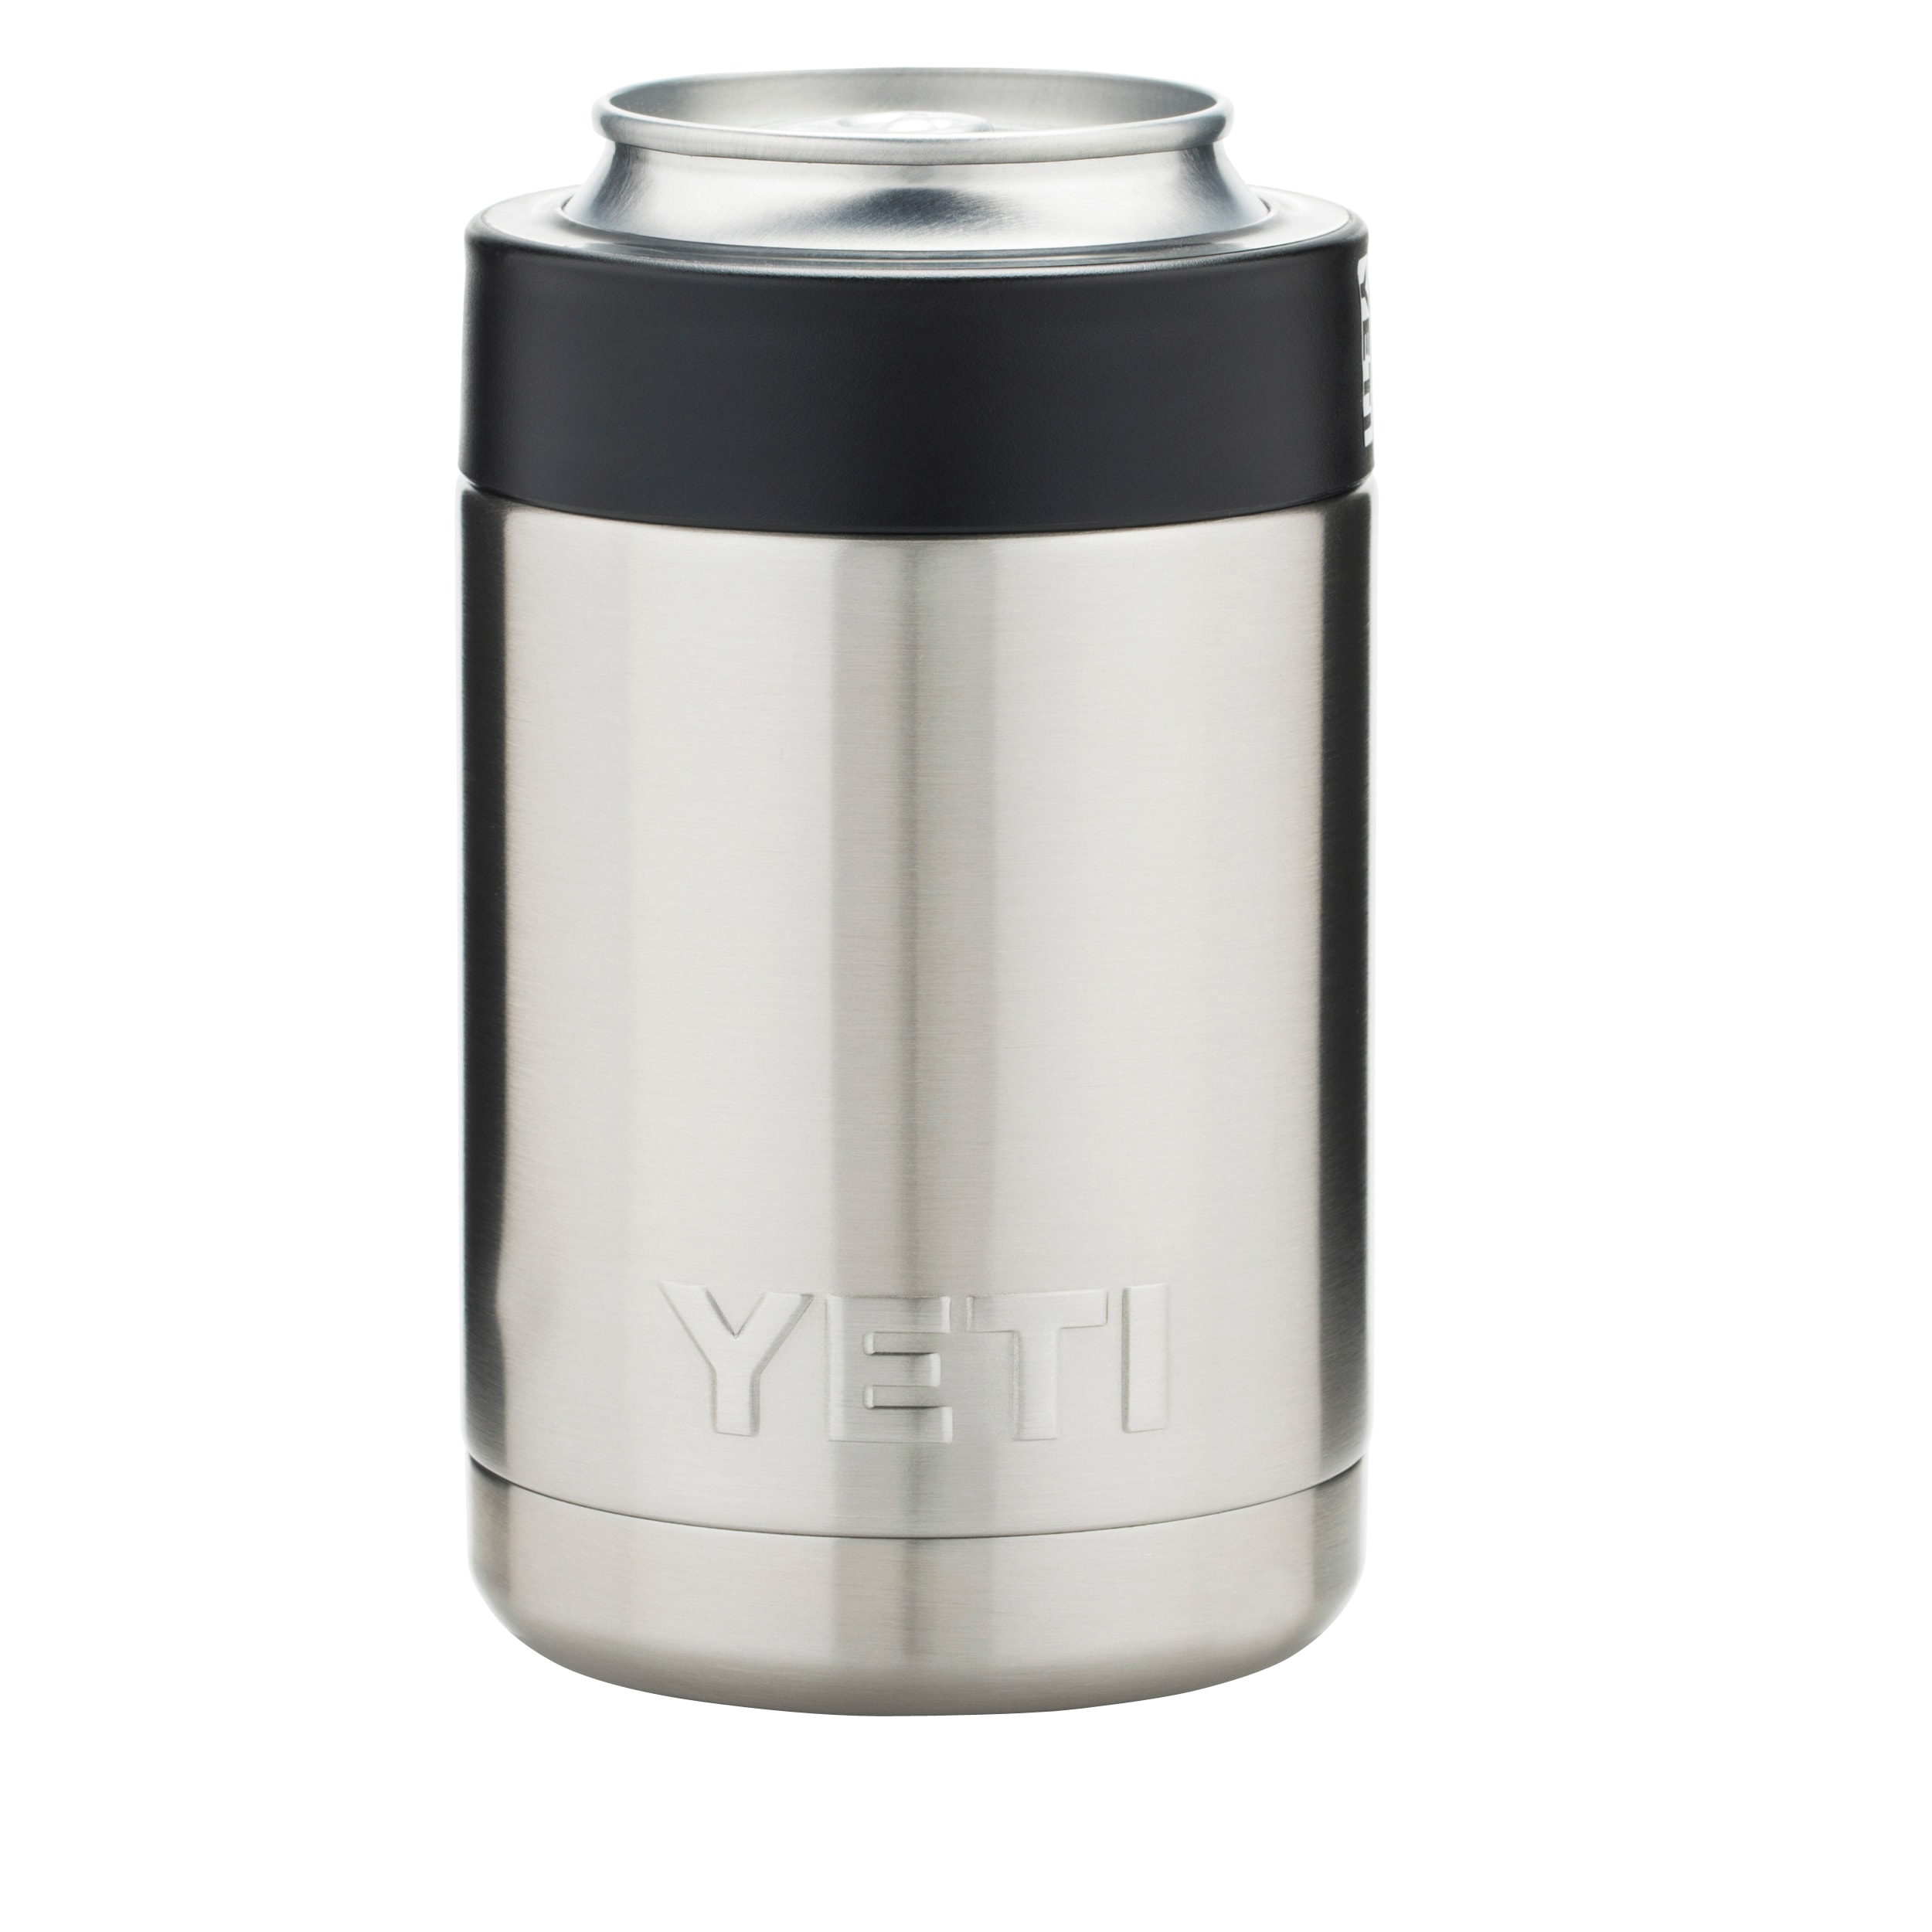 Yeti Rambler Colster can and bottle holder with stash can, stainless steel